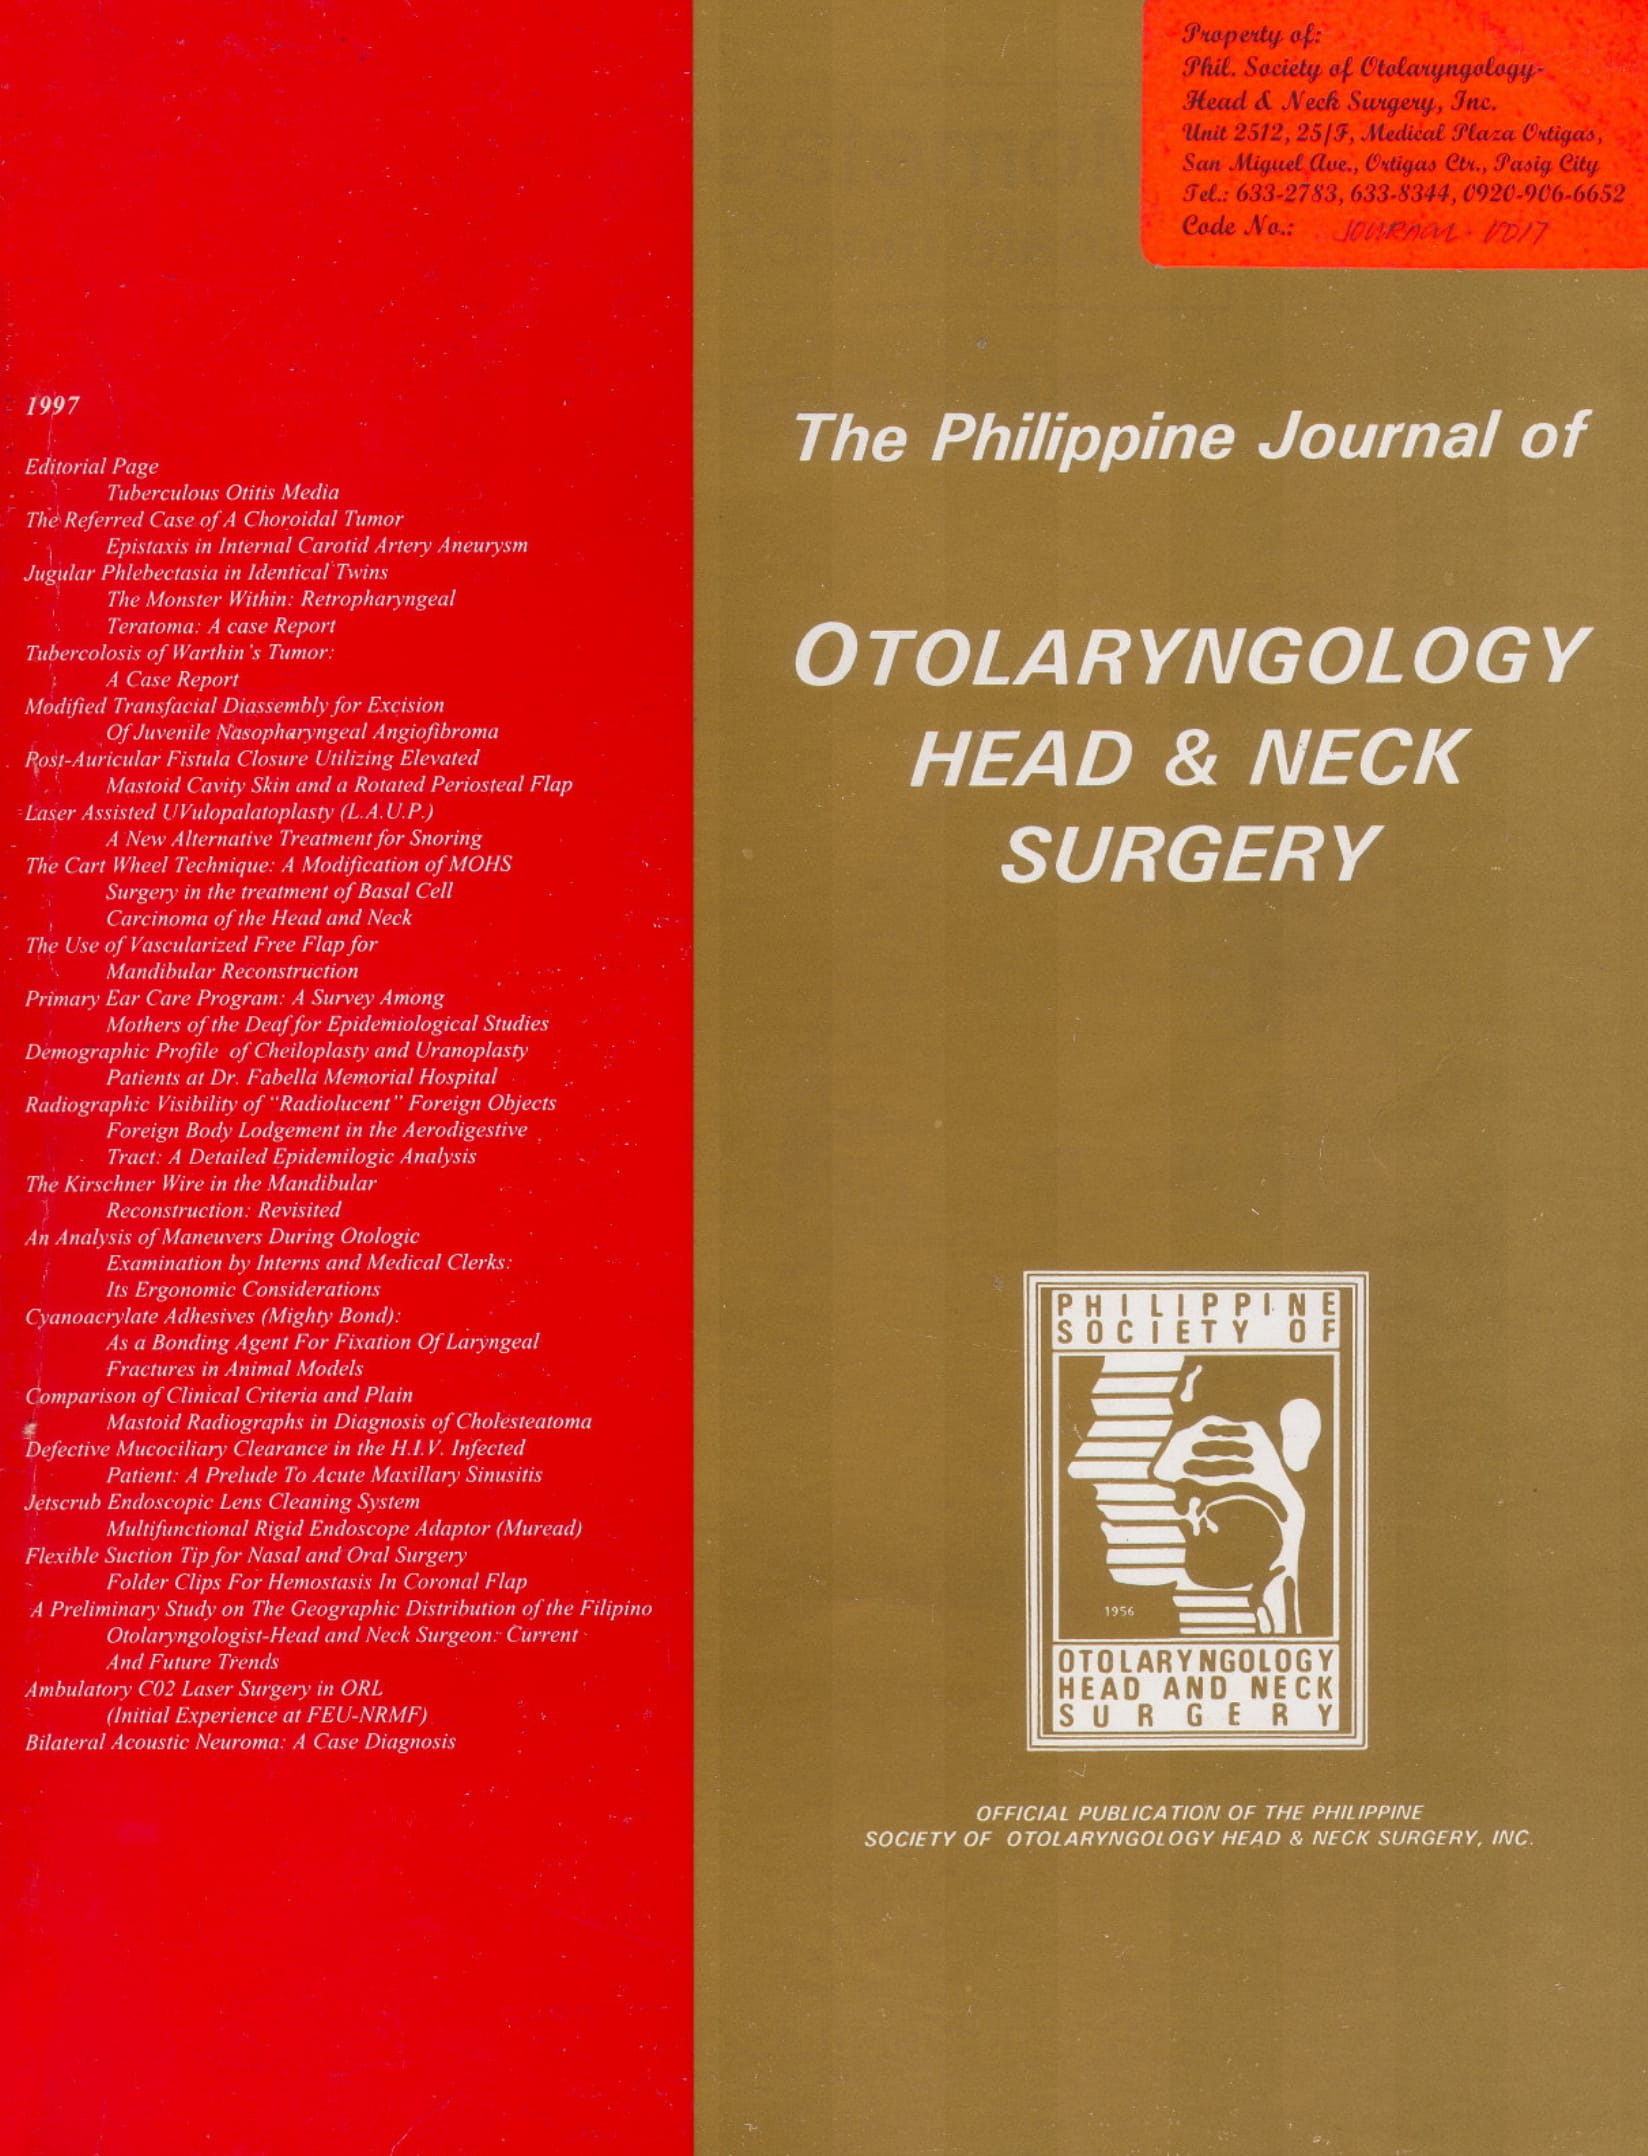 					View 1997: Philippine Journal of Otolaryngology-Head and Neck Surgery
				